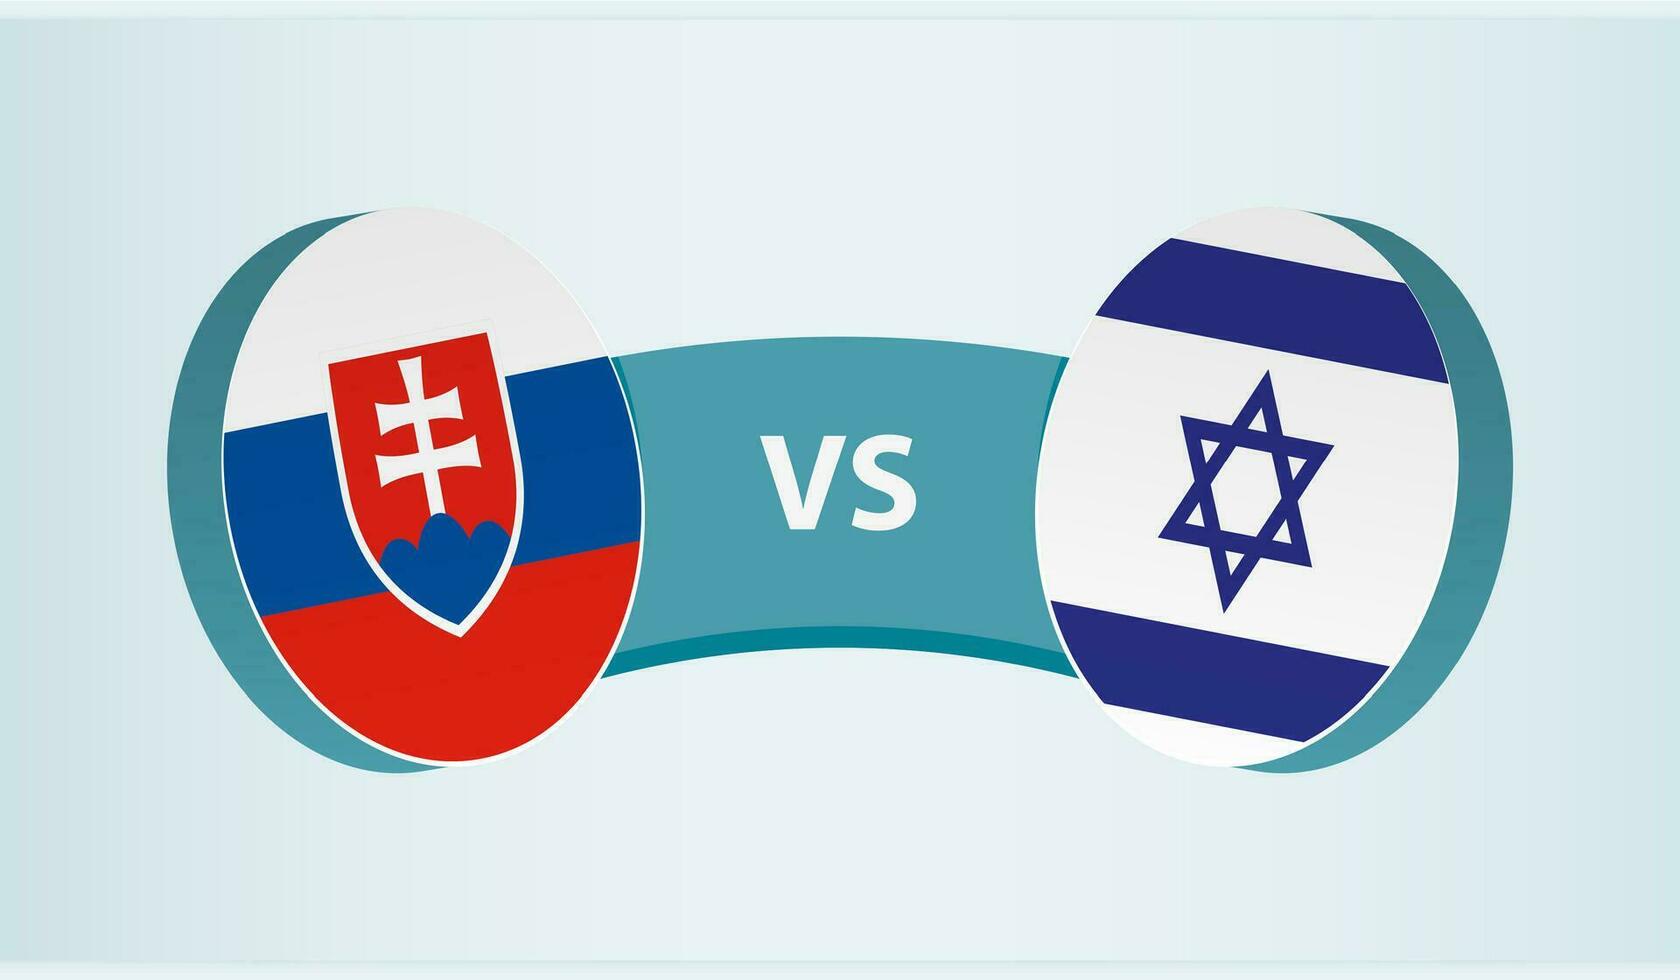 Slovakia versus Israel, team sports competition concept. vector